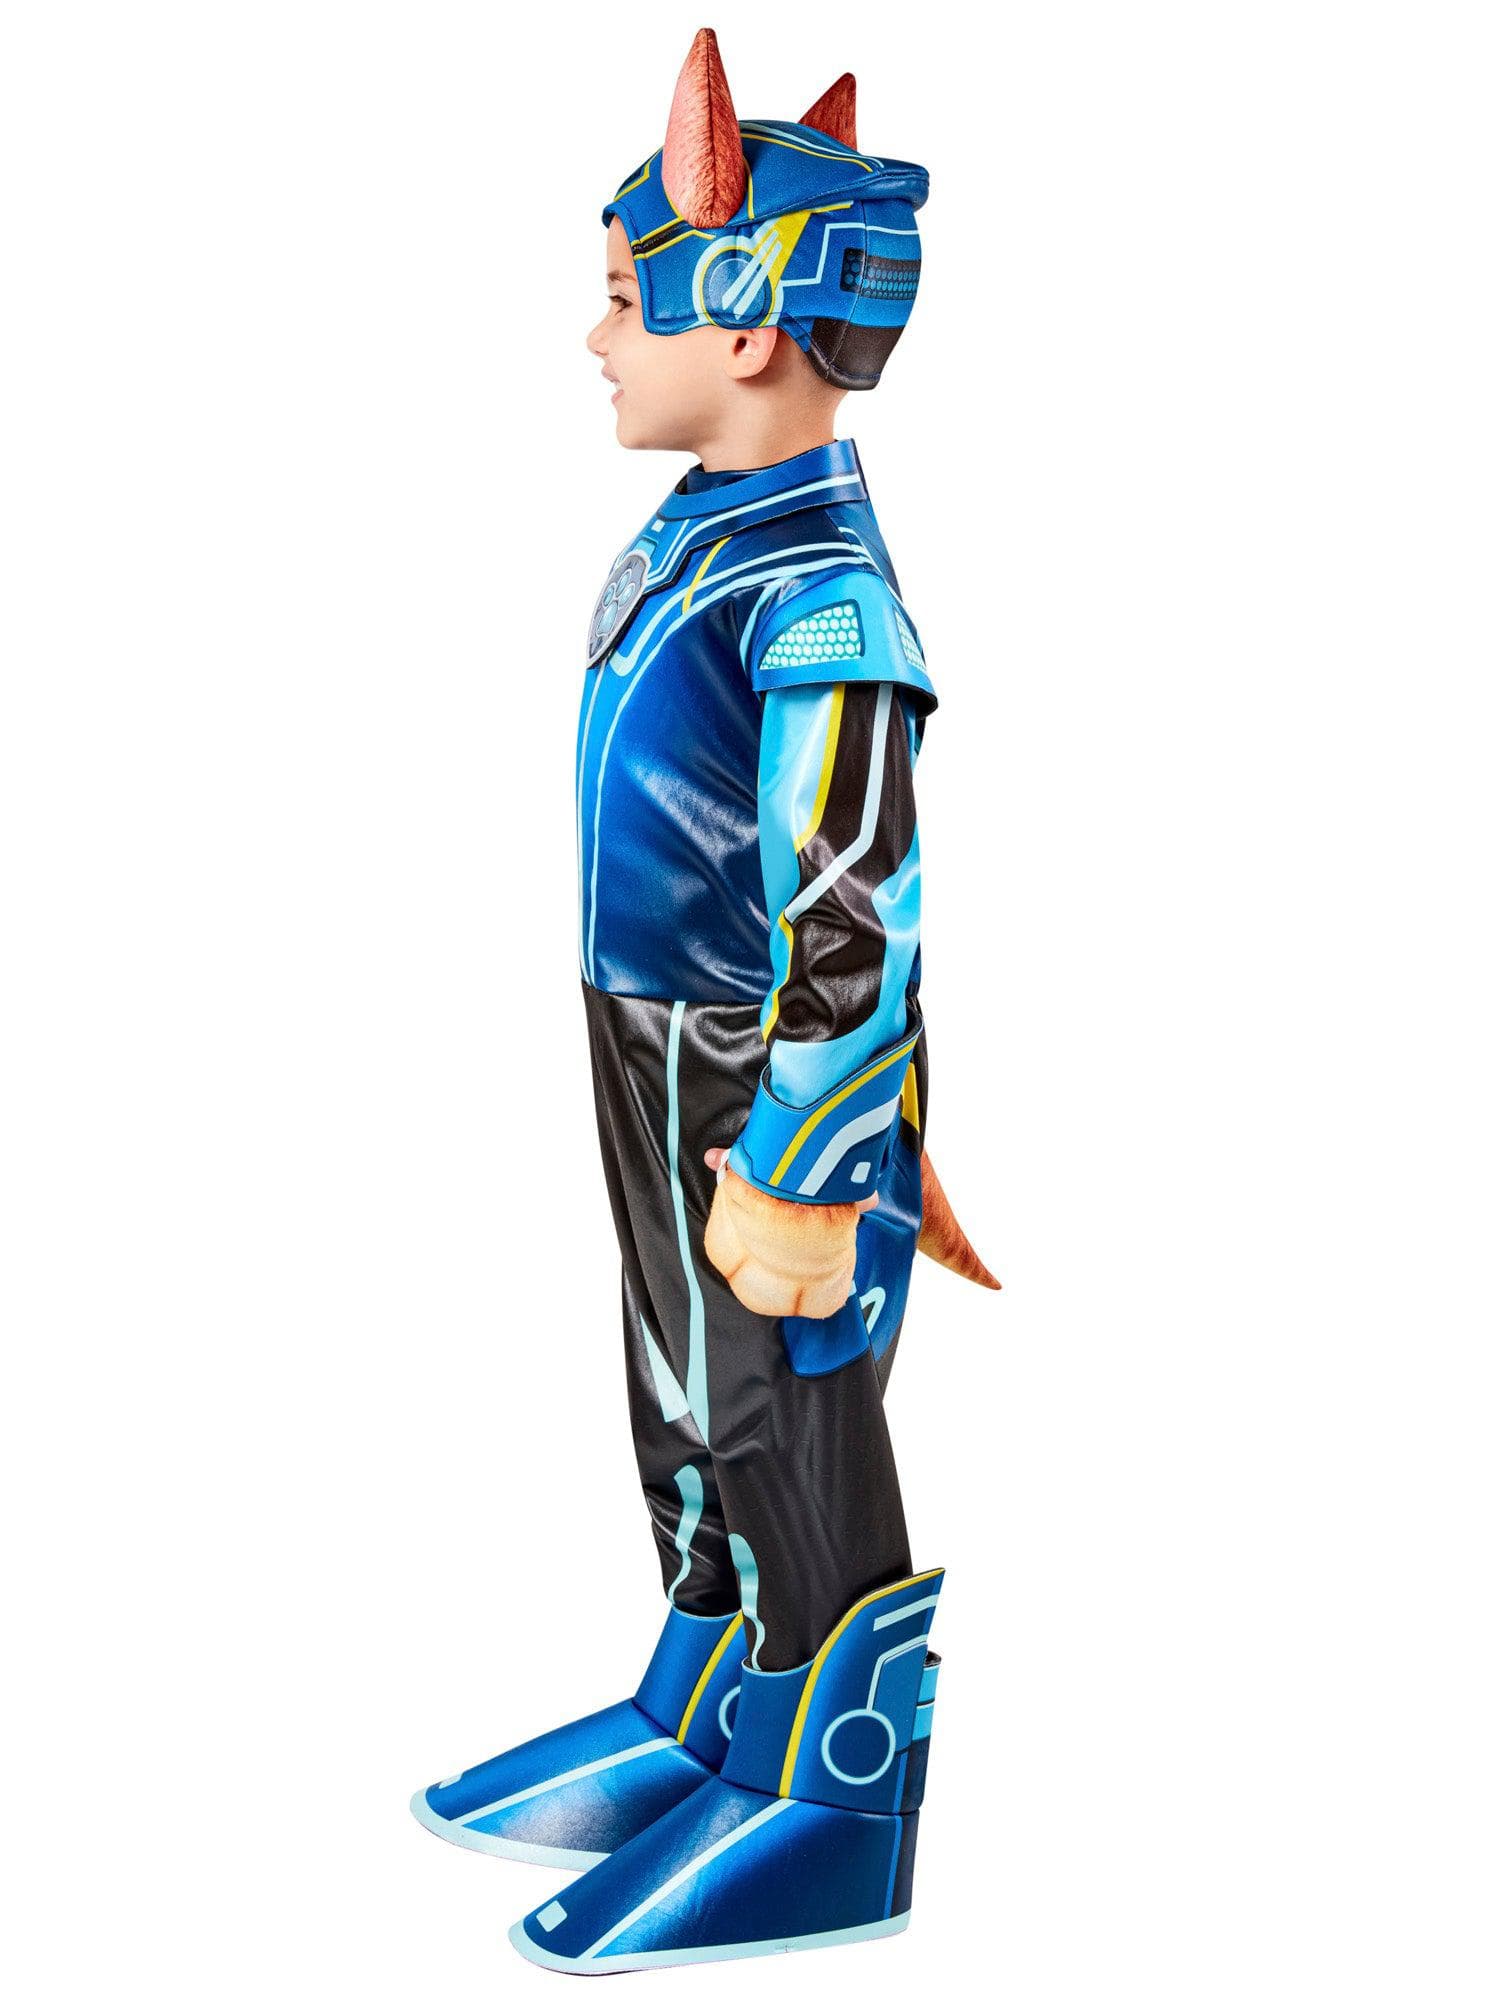 Paw Patrol 2 Mighty Chase Costume for Toddlers - costumes.com